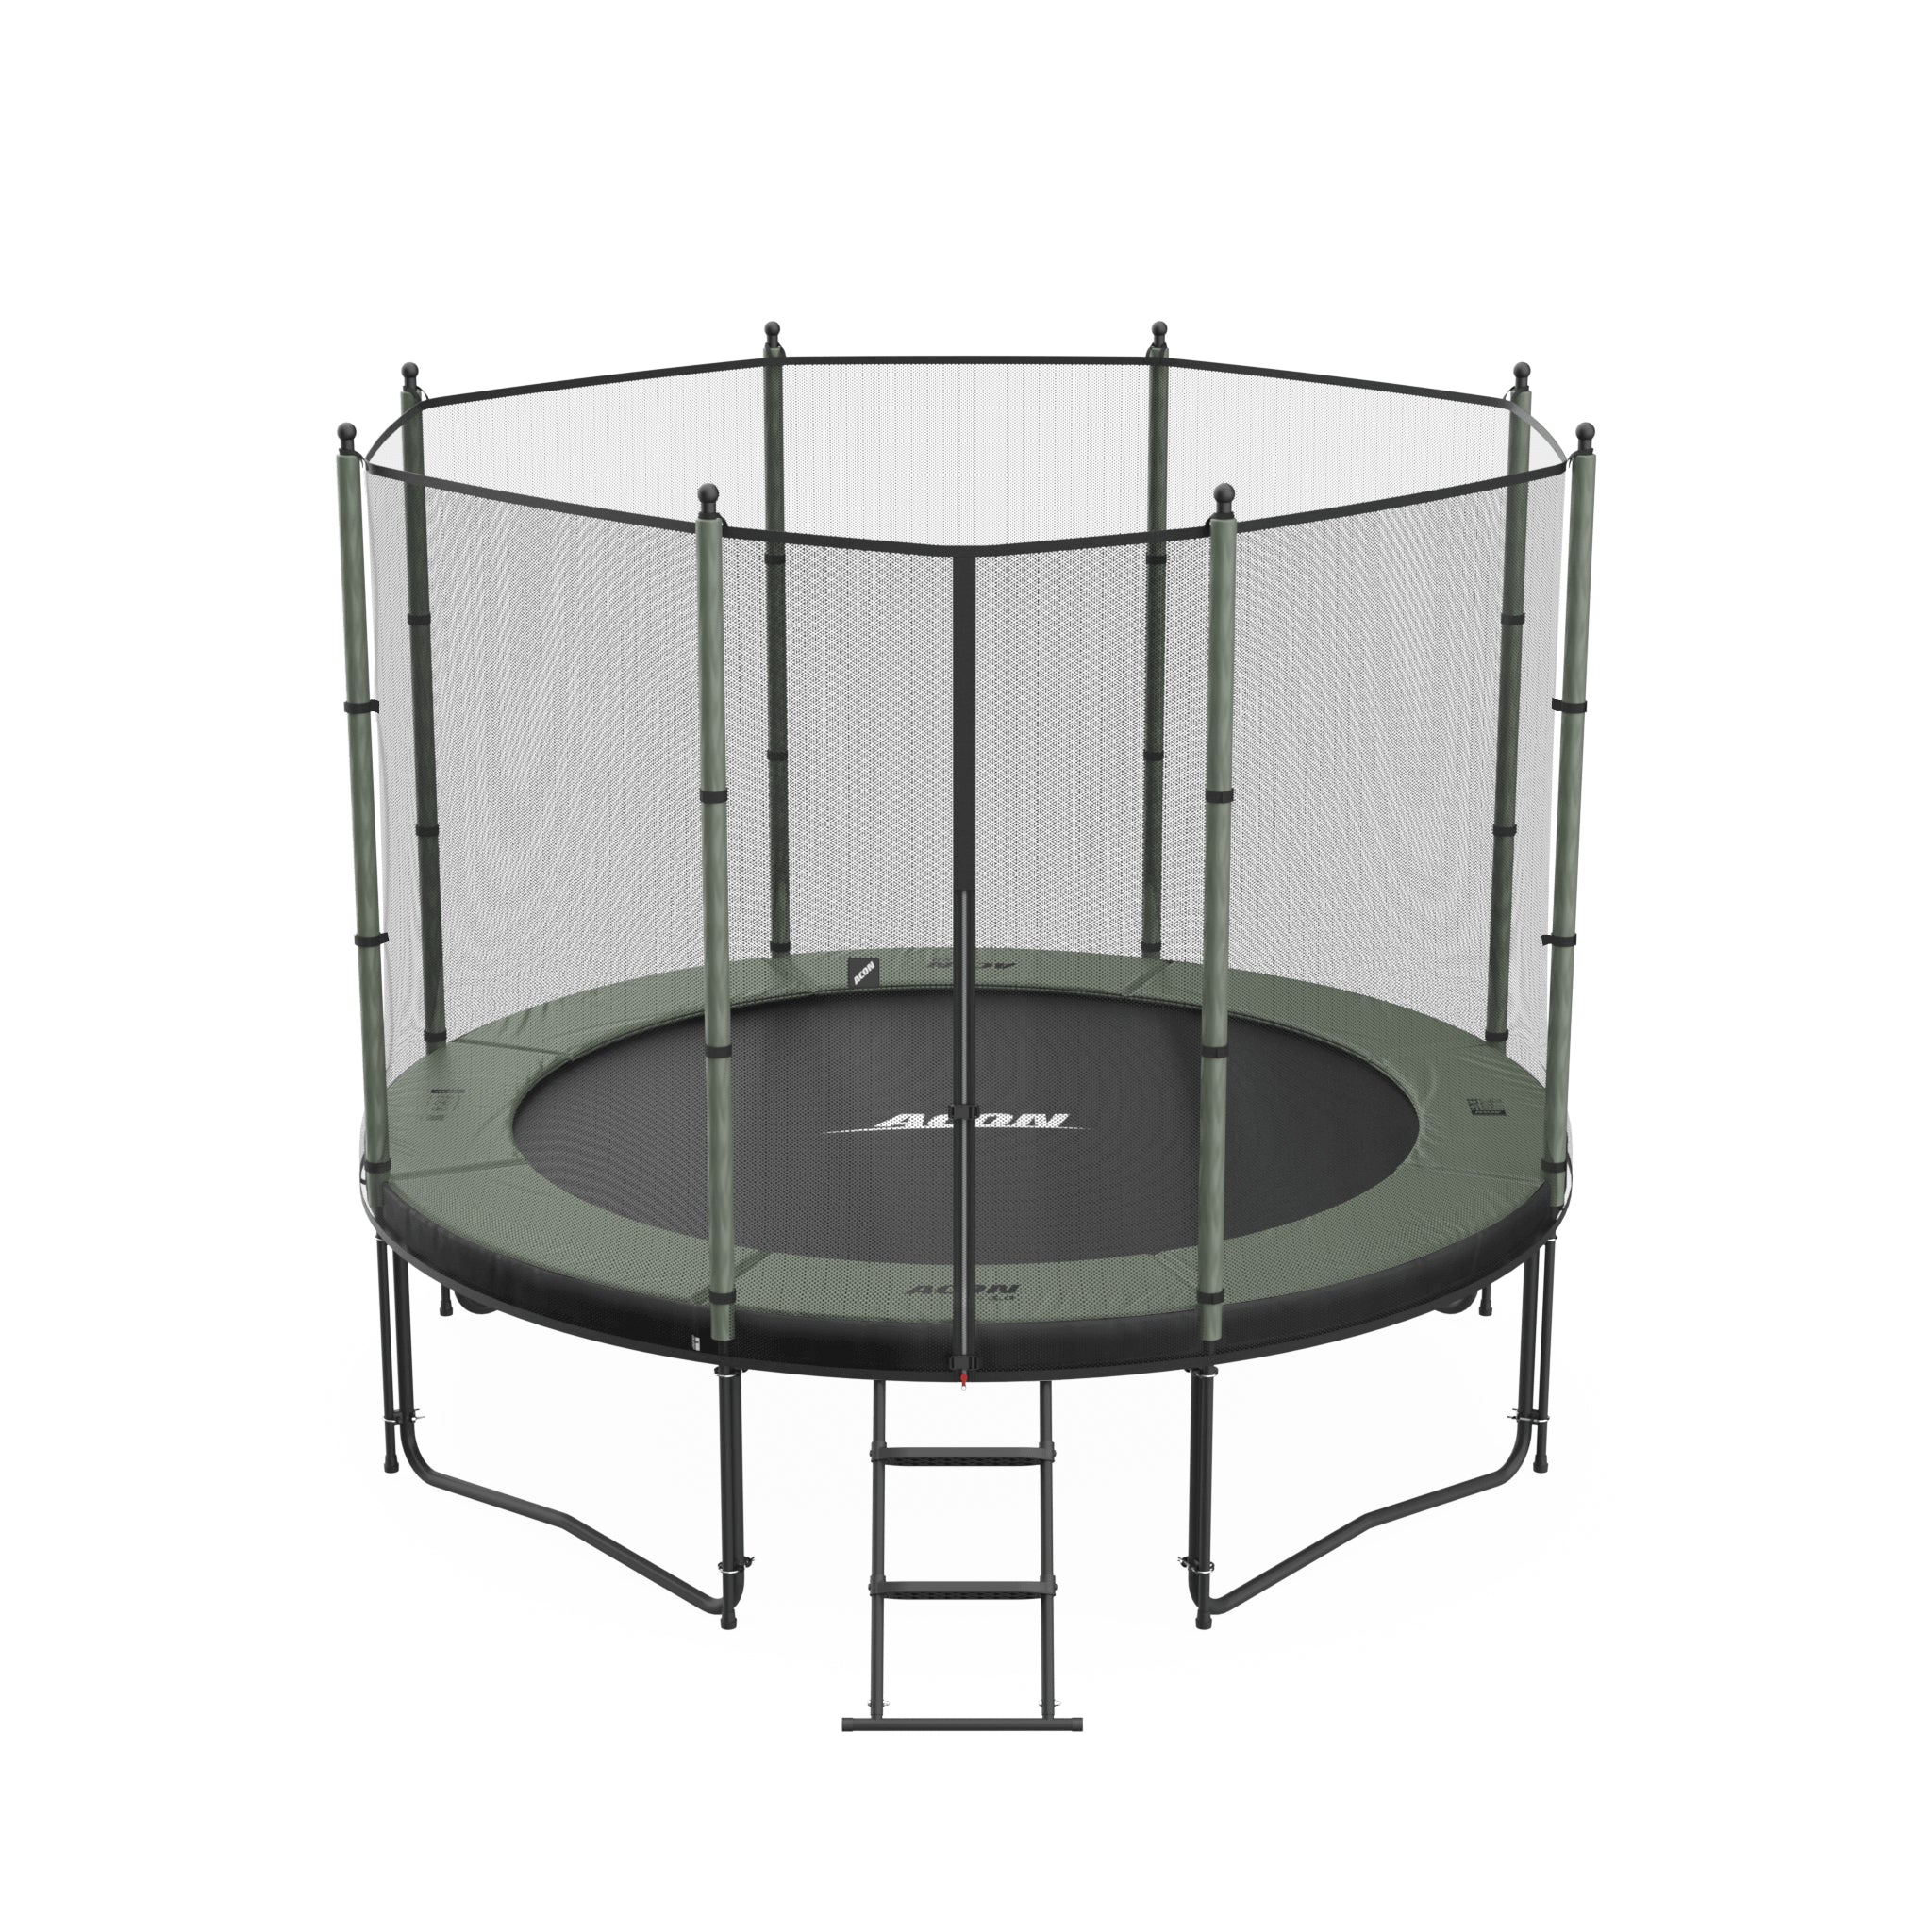 ACON Air 10ft Trampoline with Standard Enclosure and ladder.